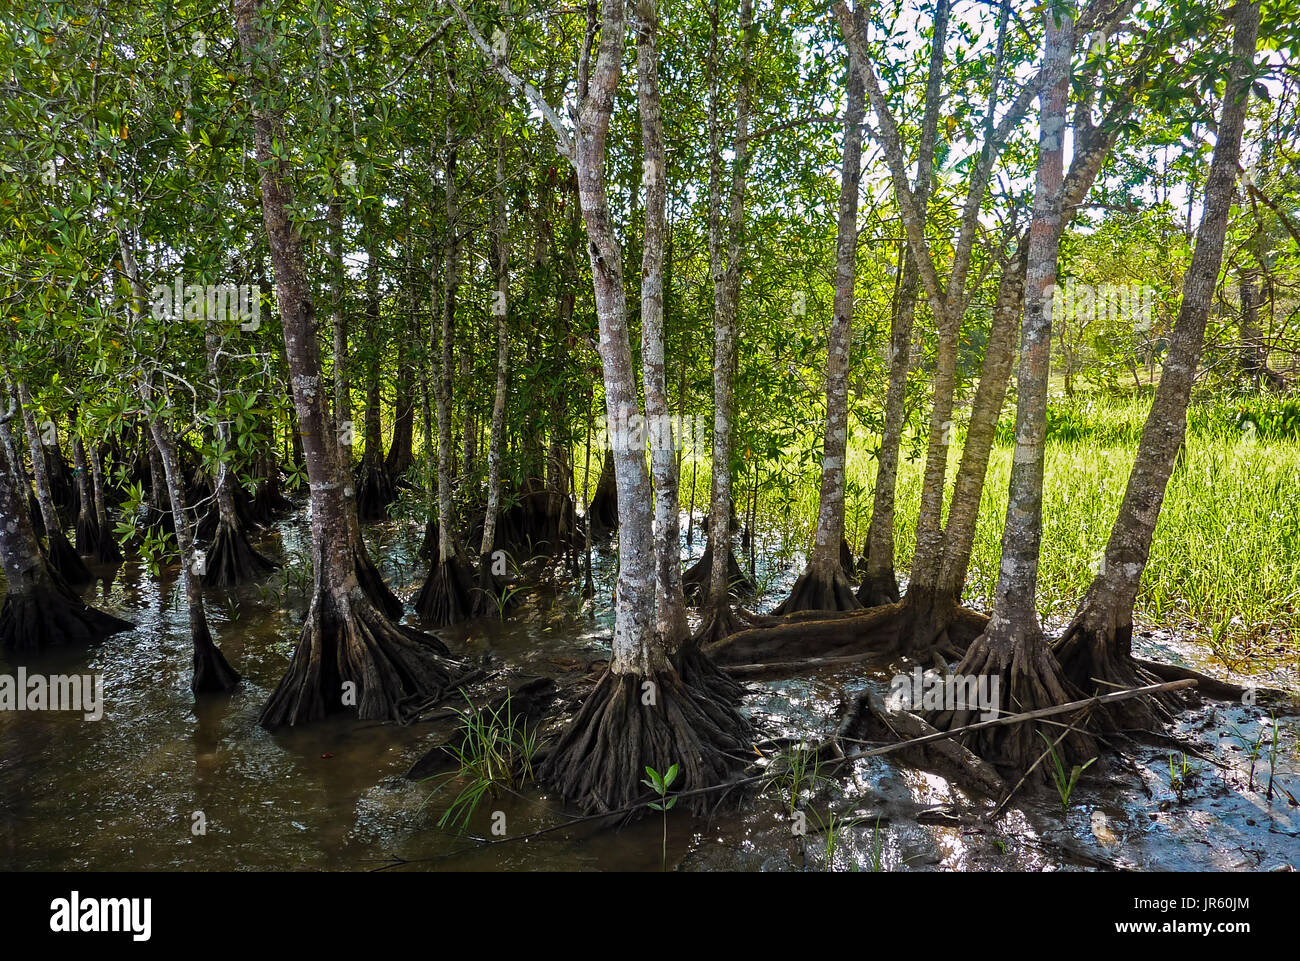 Mangrove forest in Costa Rica Stock Photo